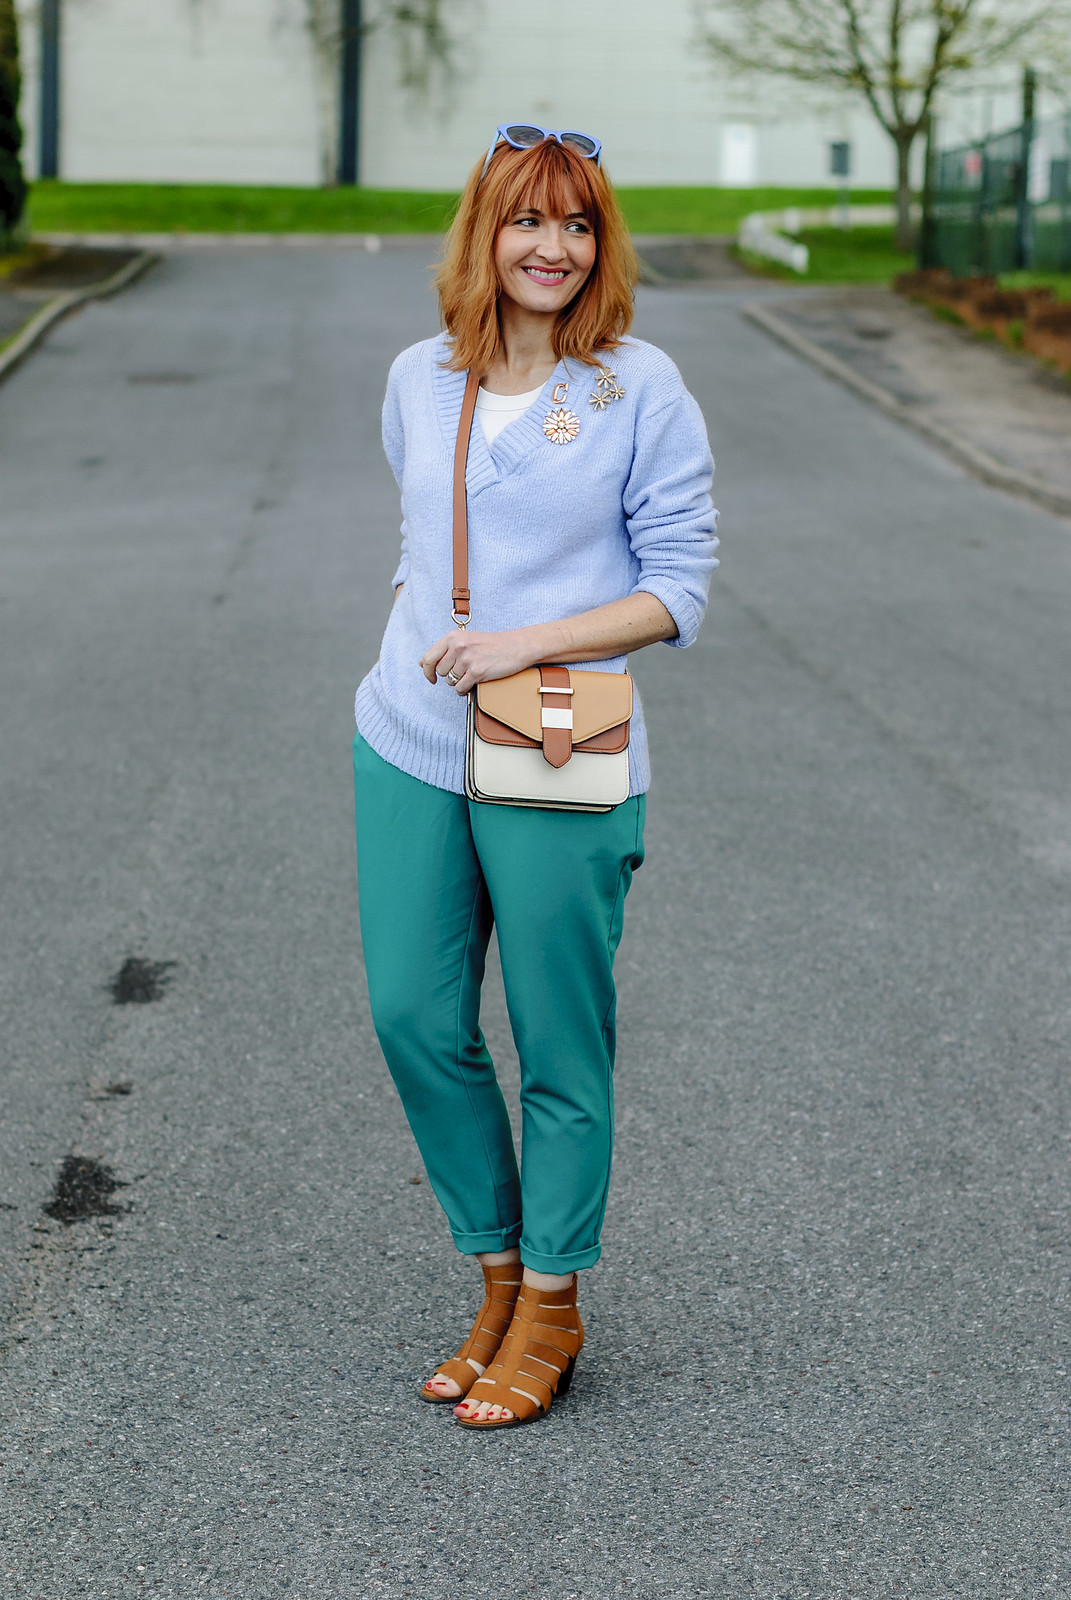 Spring look: Pale blue sweater emerald green peg trousers flower brooches tan strappy block heeled sandals two tone cross body bag | Not Dressed As Lamb, over 40 style